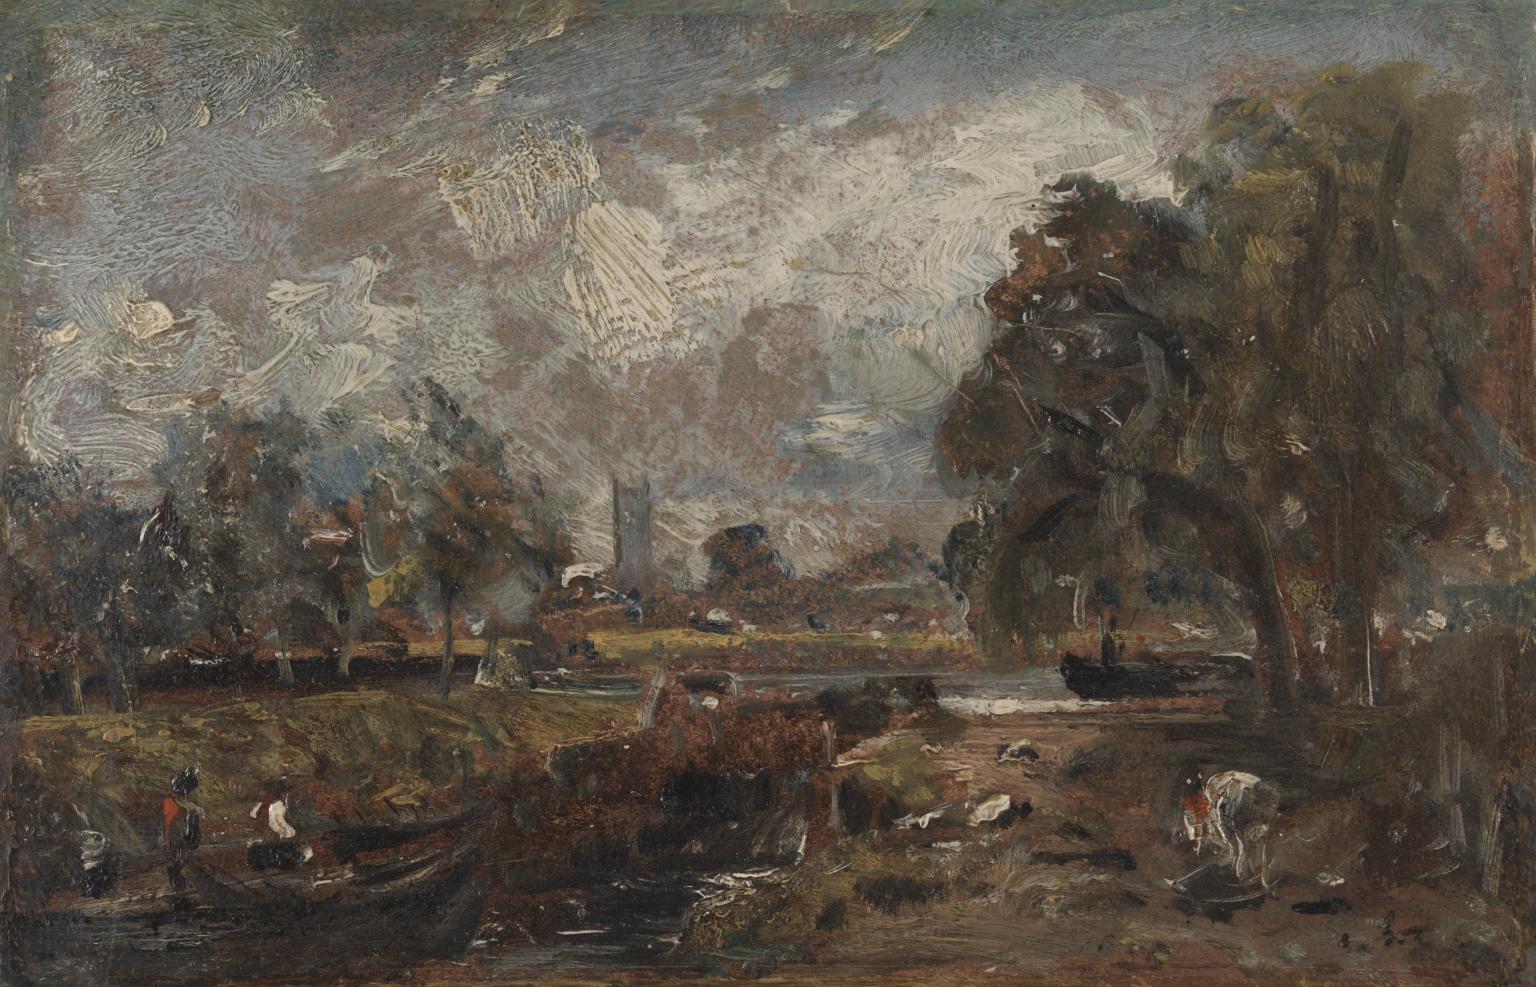 File:Constable - The Valley Farm (sketch), c.1814 or 1835, 140-1888.jpg -  Wikimedia Commons